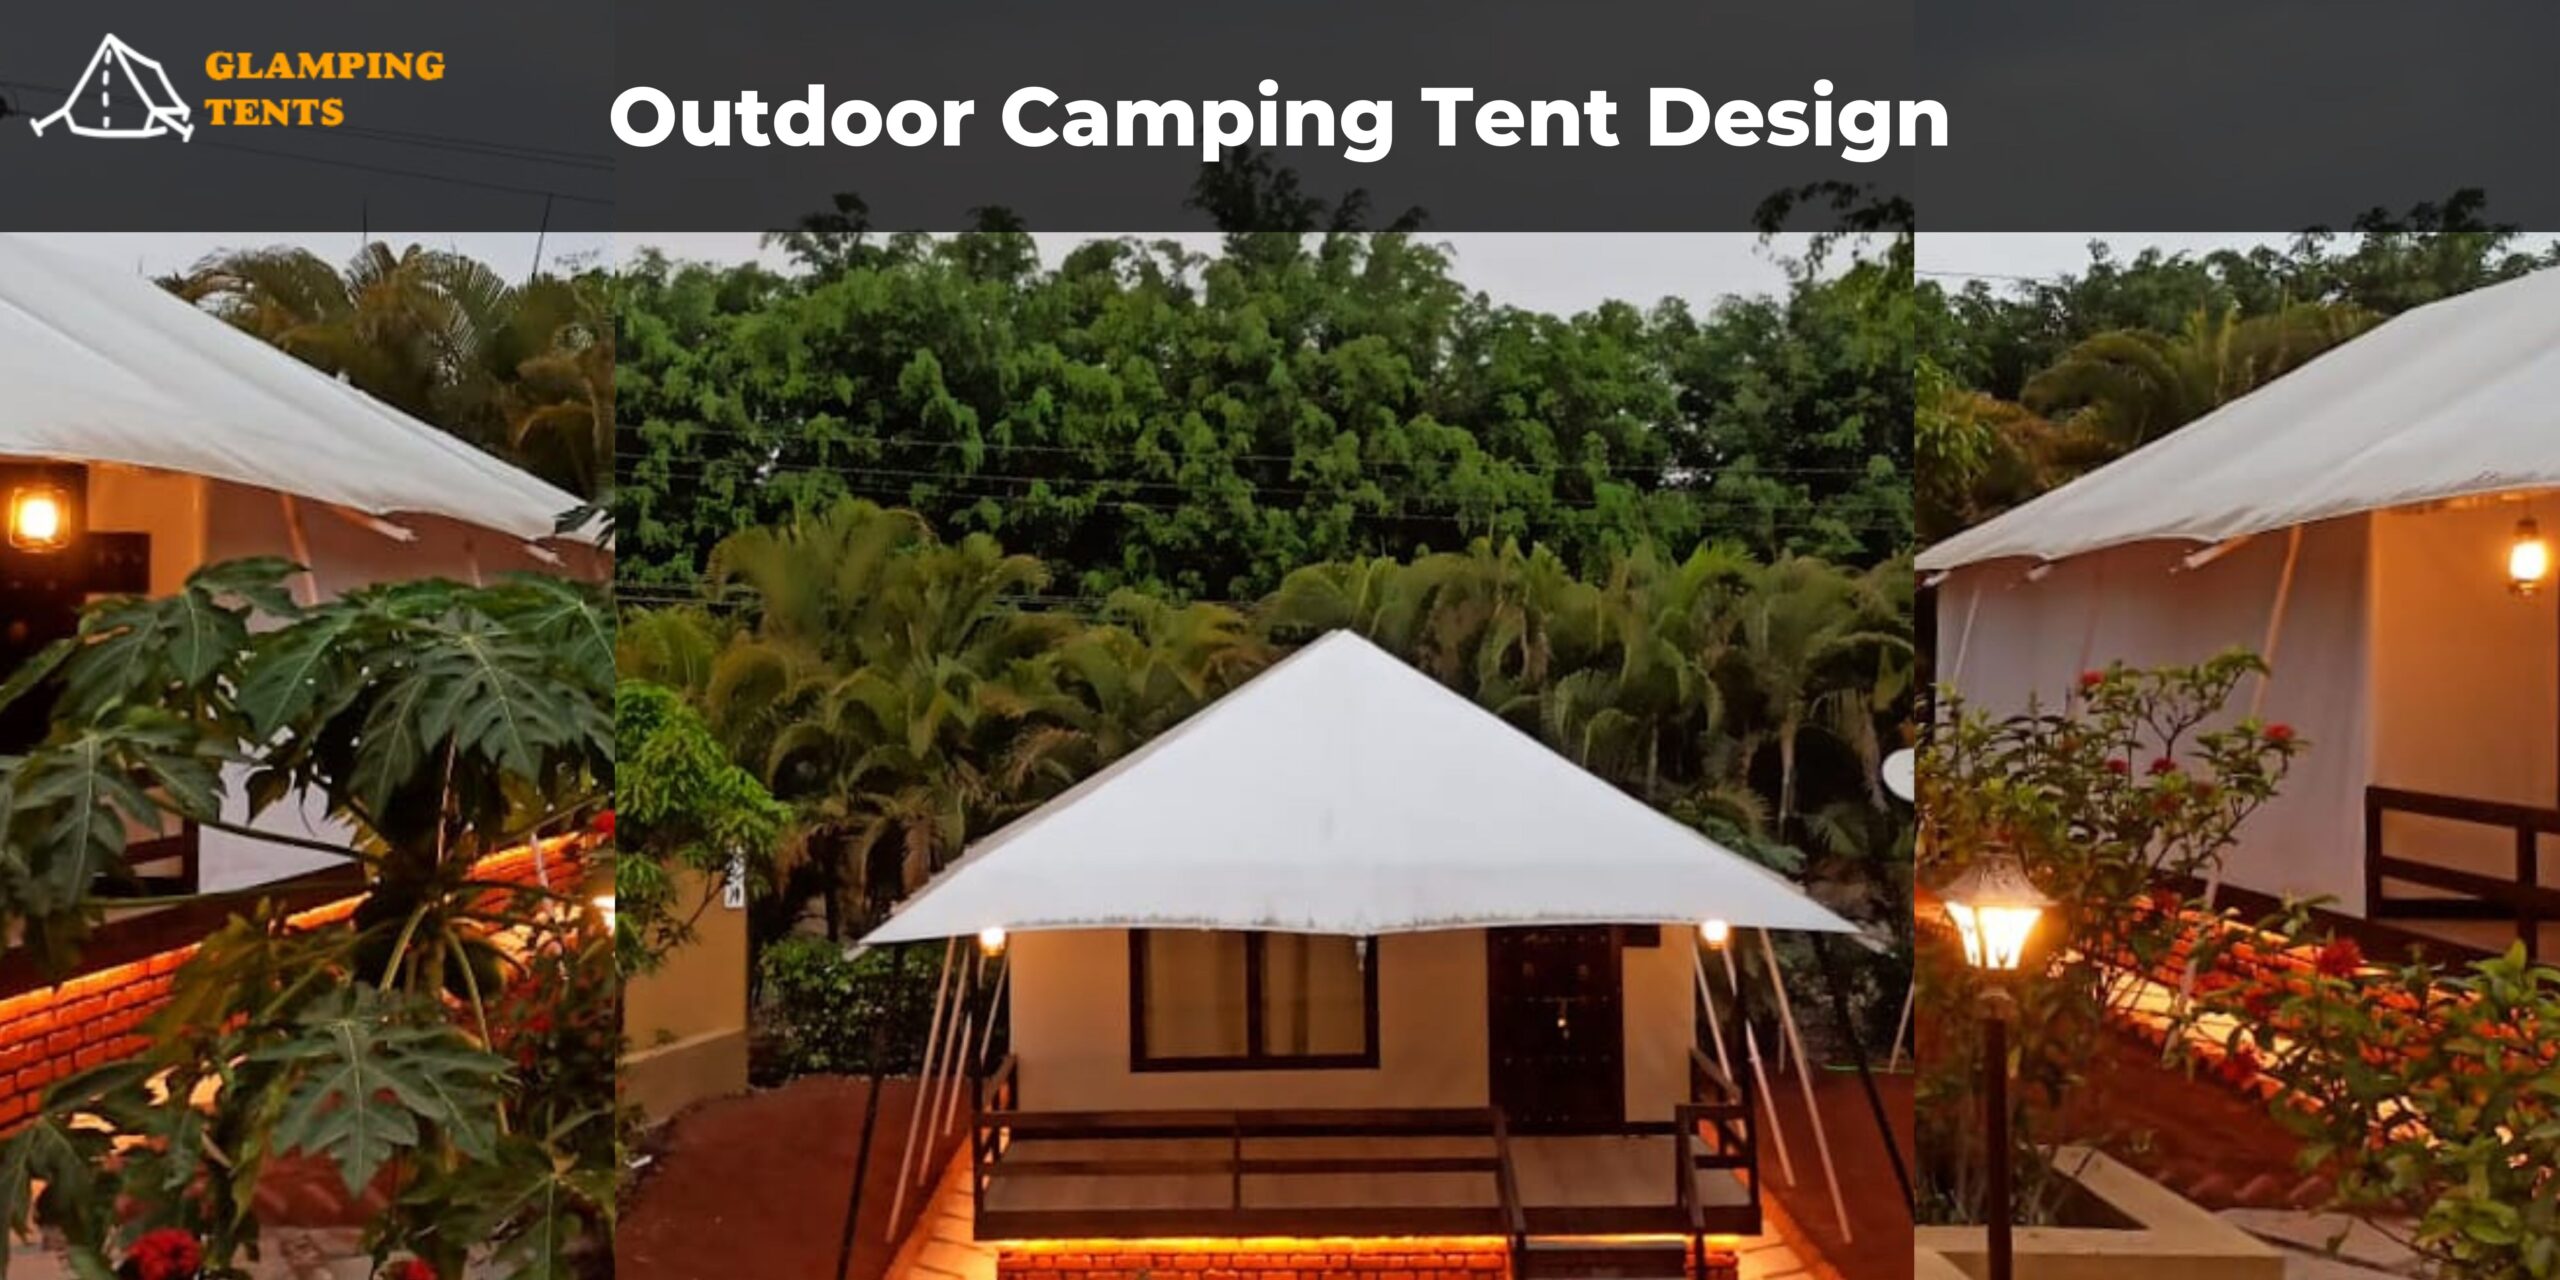 What should you Know About the Outdoor Camping Tent Design?